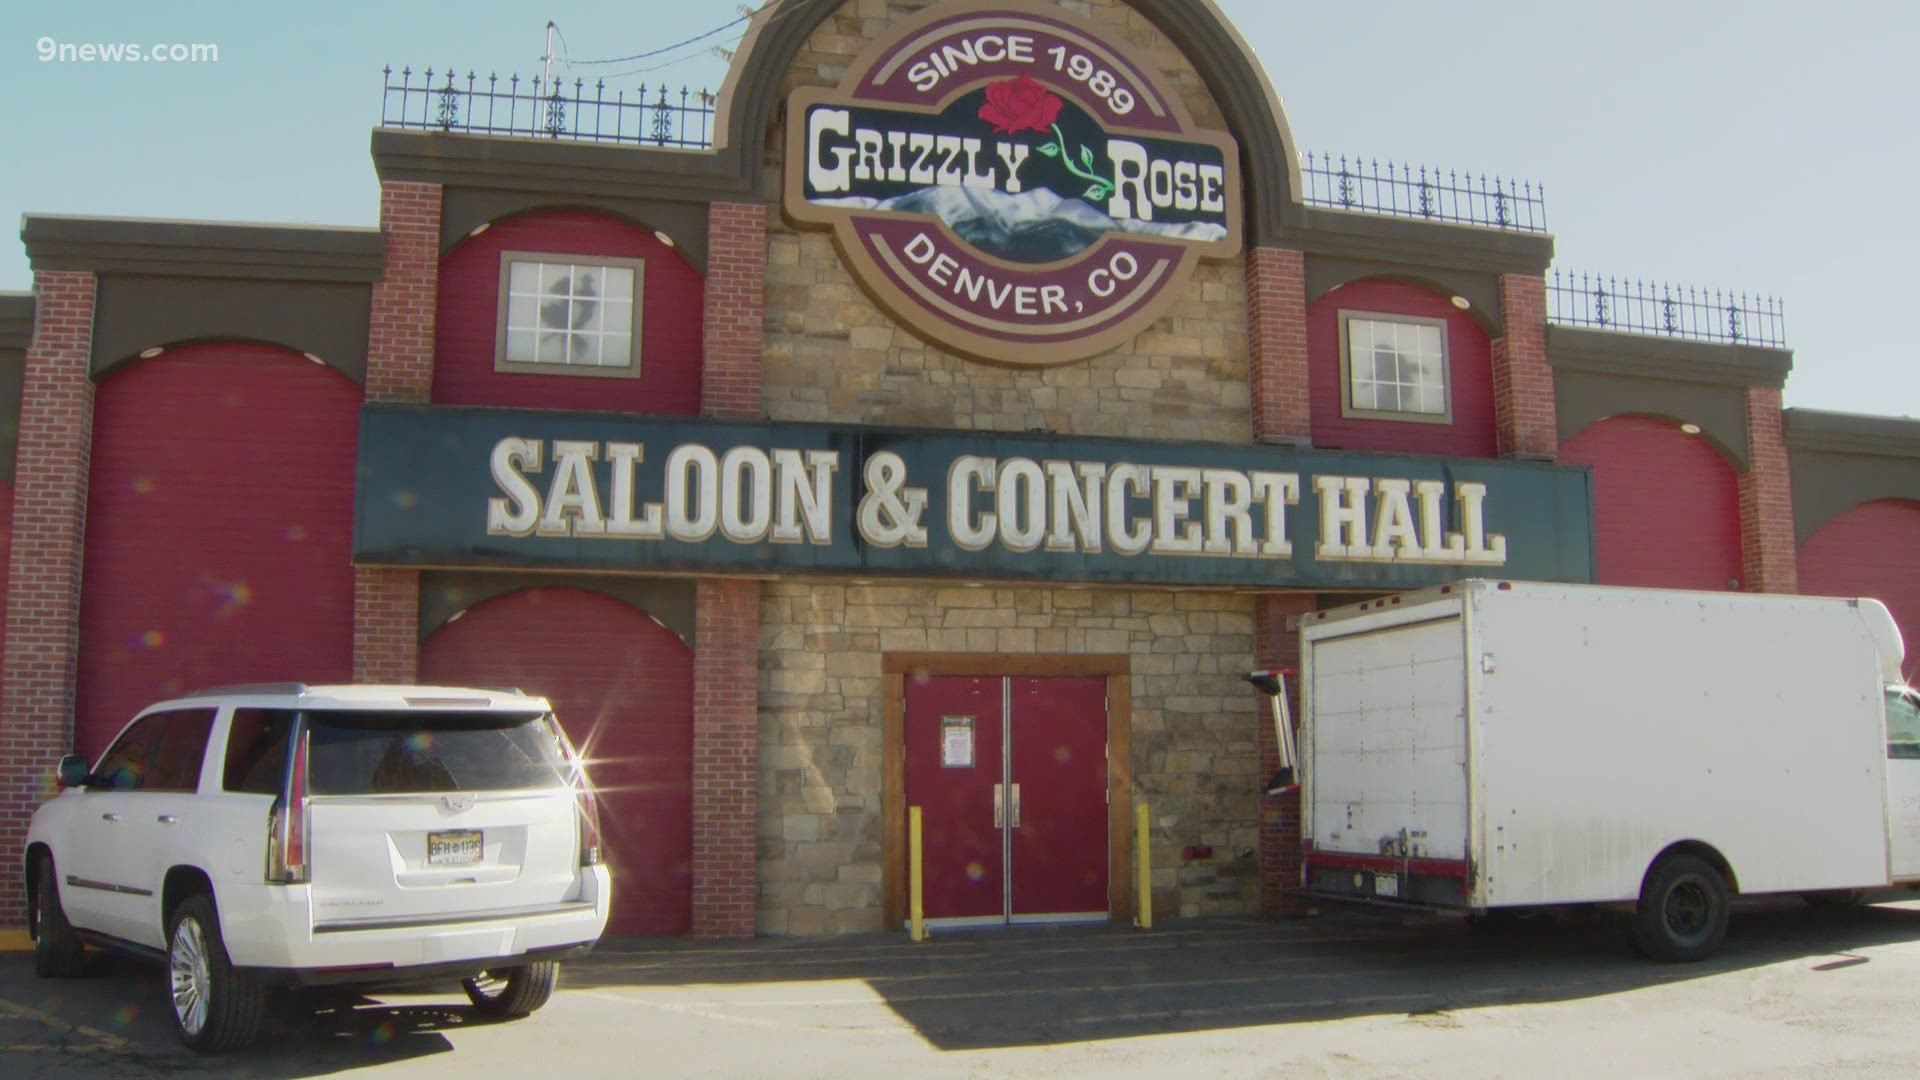 The Tri-County Health Department said the venue recently reopened after "repeated complaints" last fall.